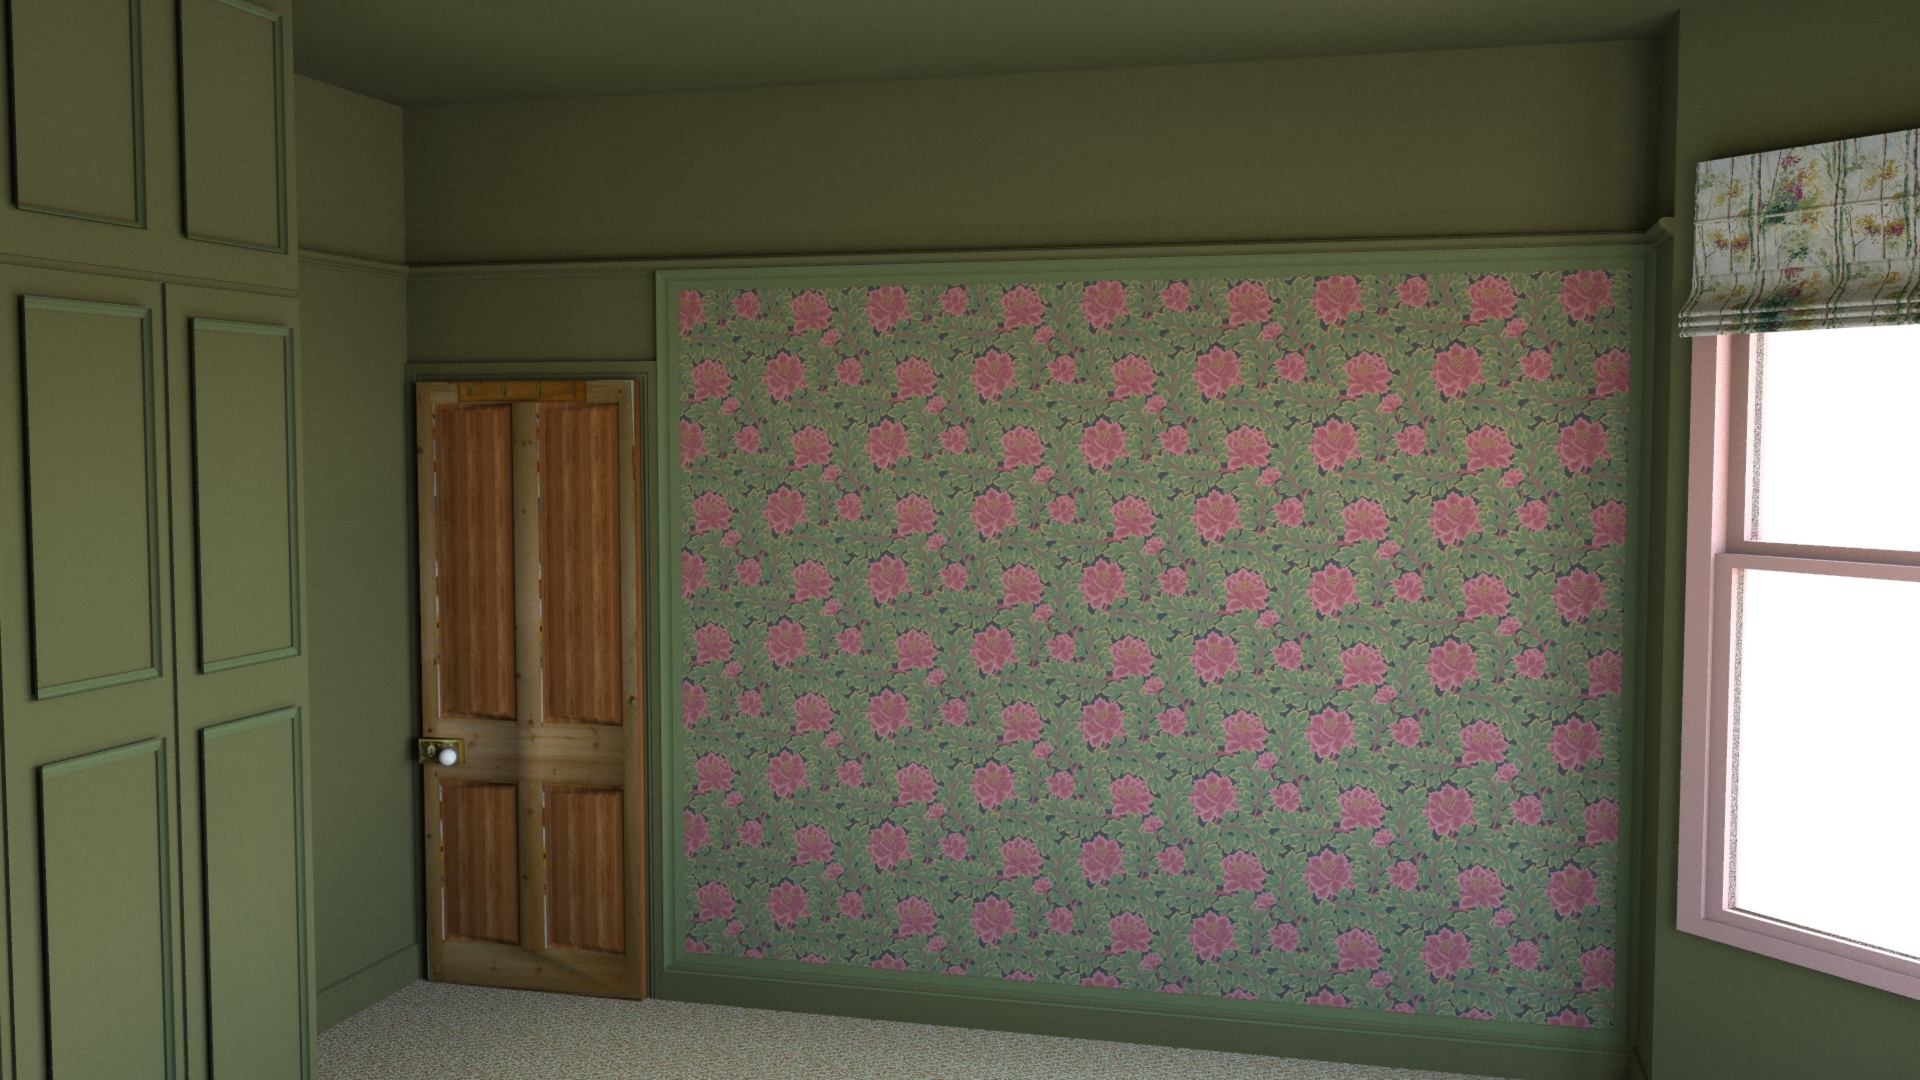 A computer generated image of the wallpaper behind the bed.